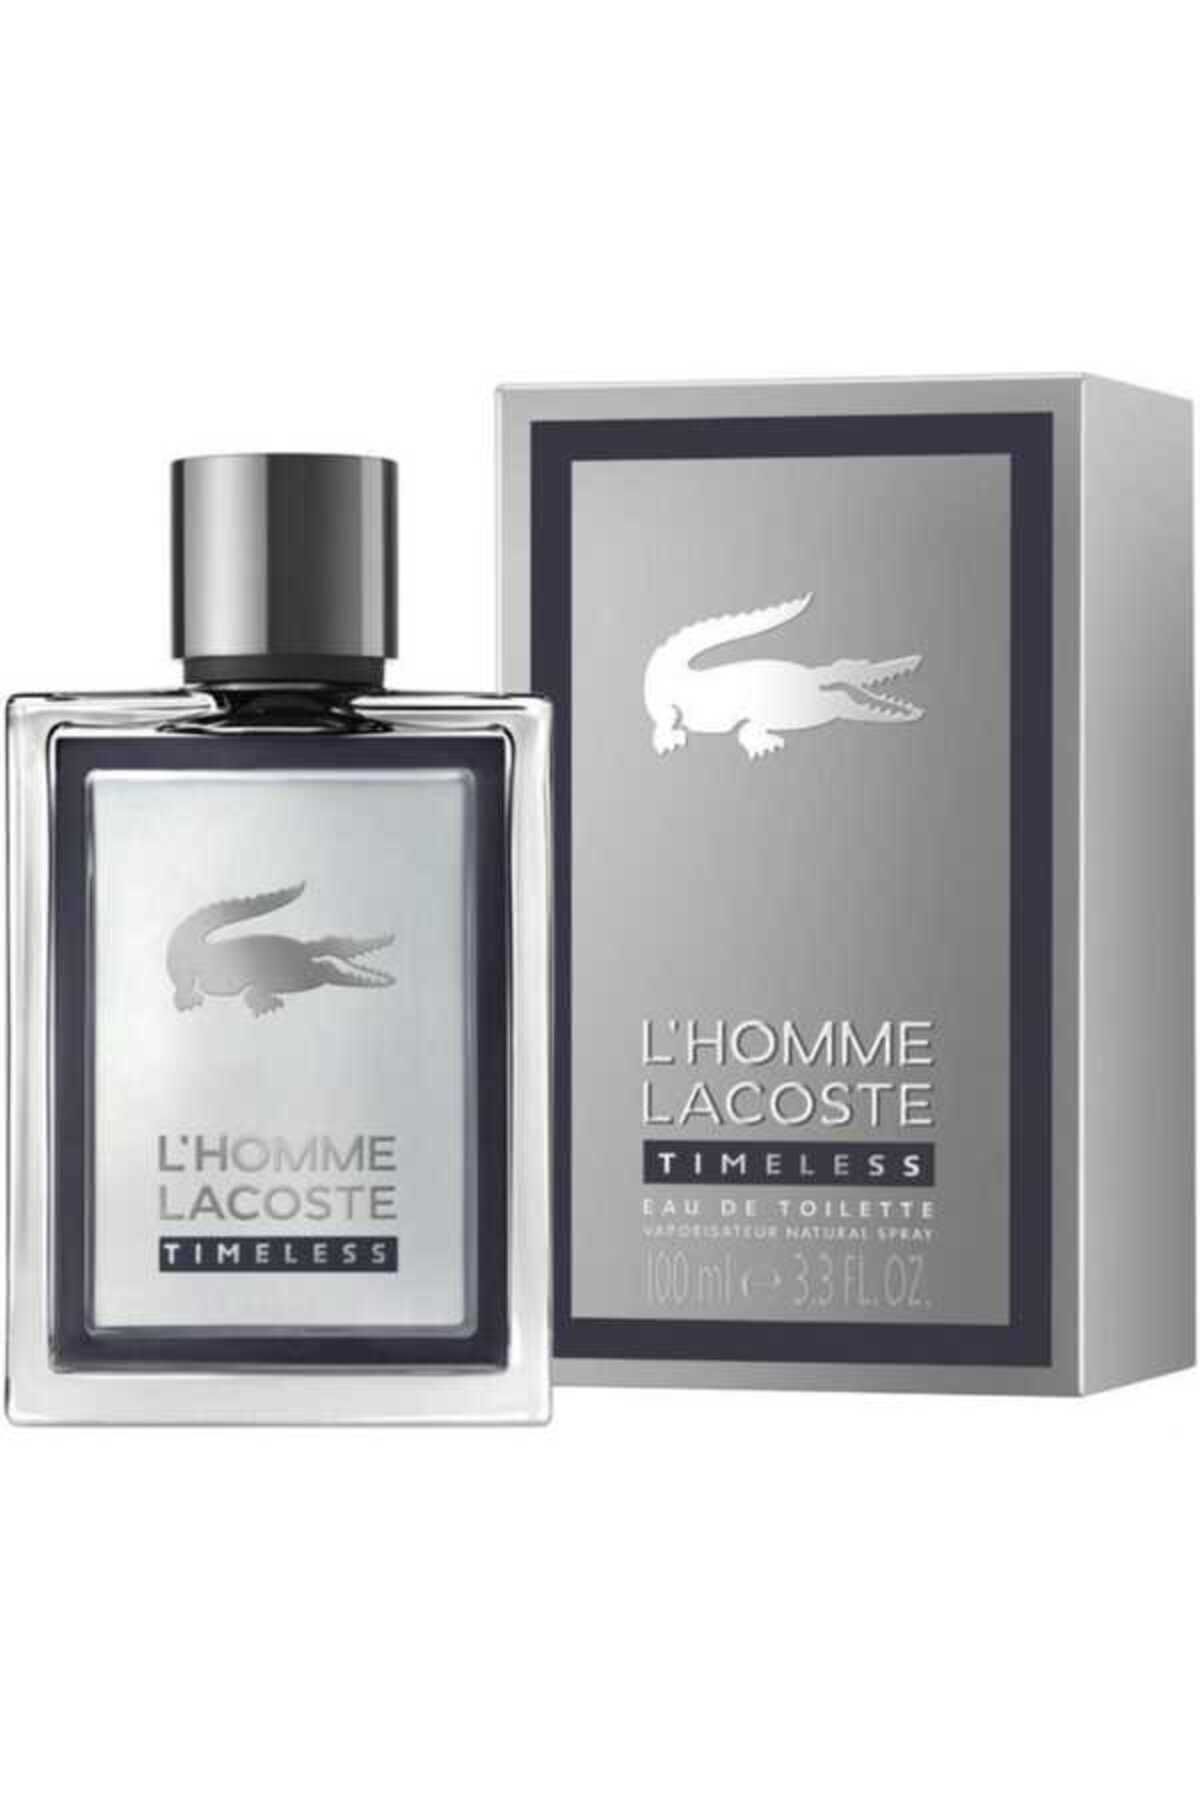 Lacoste L'homme Timeless Edt 100 ml